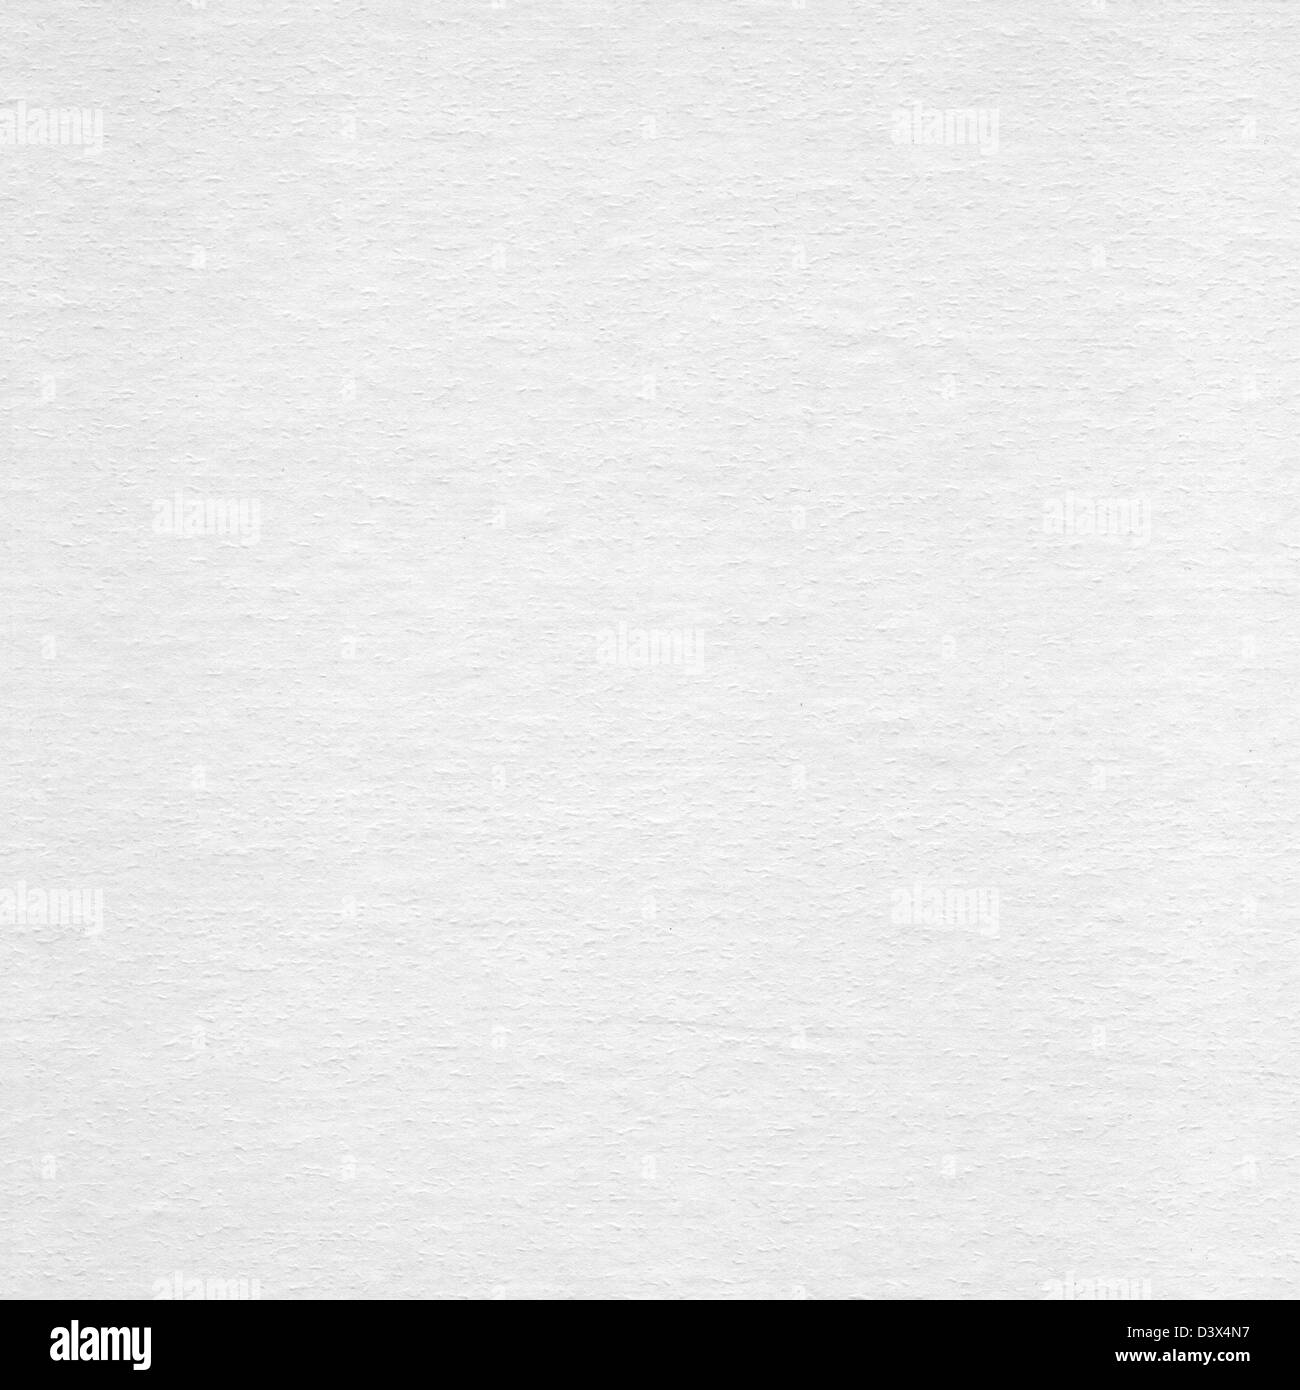 Texture of soft paper Stock Photo - Alamy